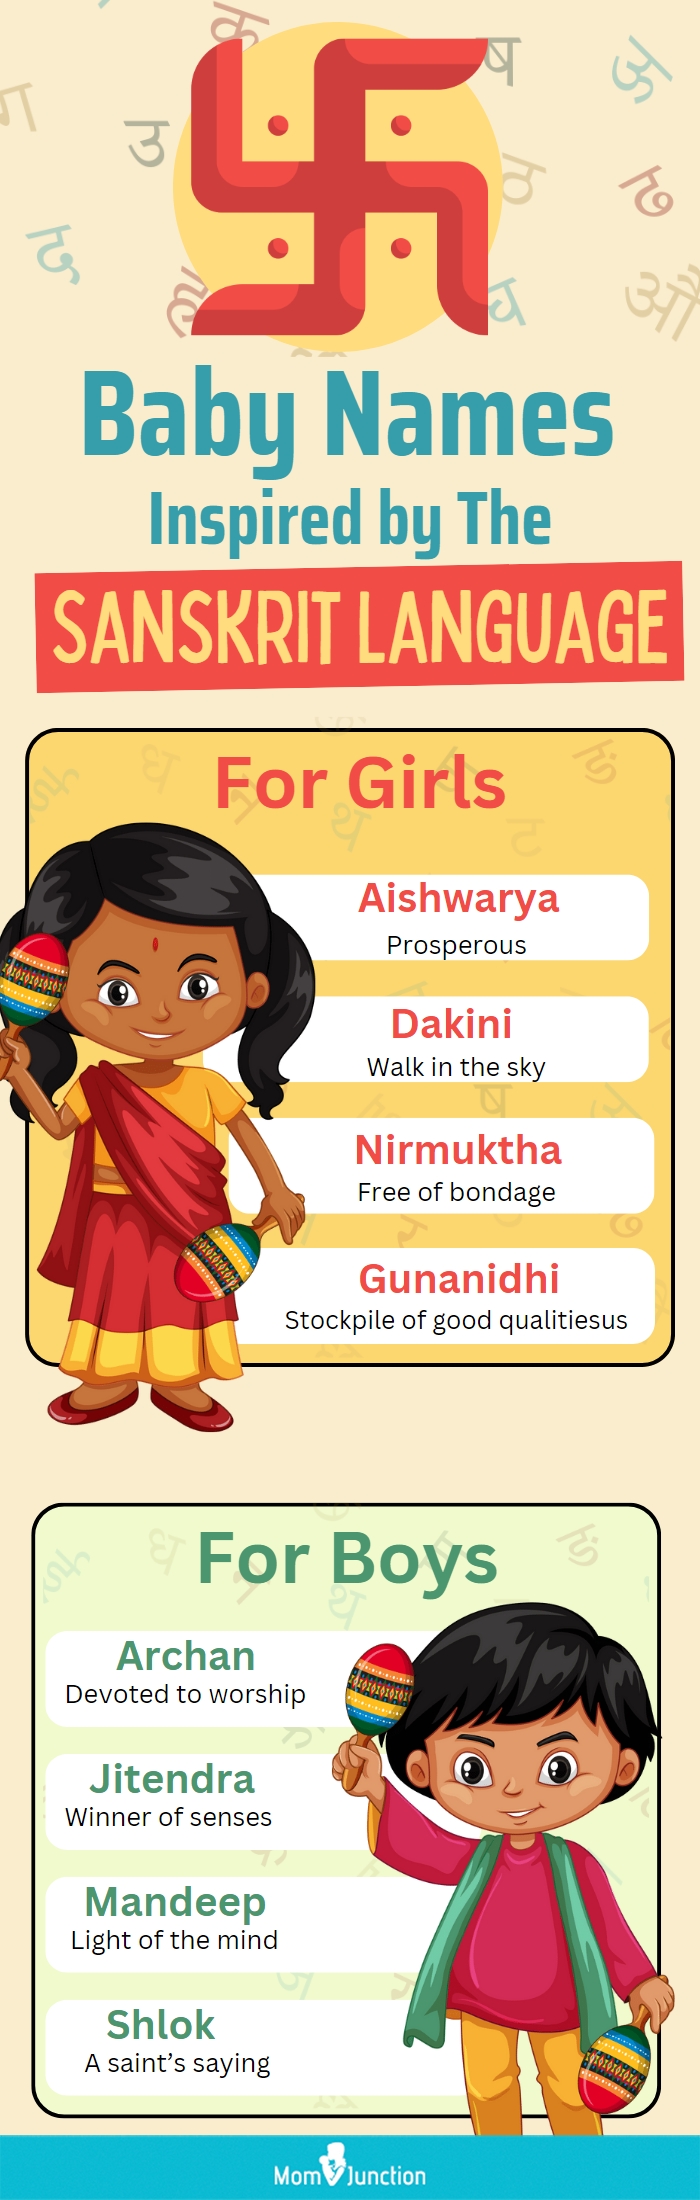 baby names inspired by the sanskrit language [infographic]